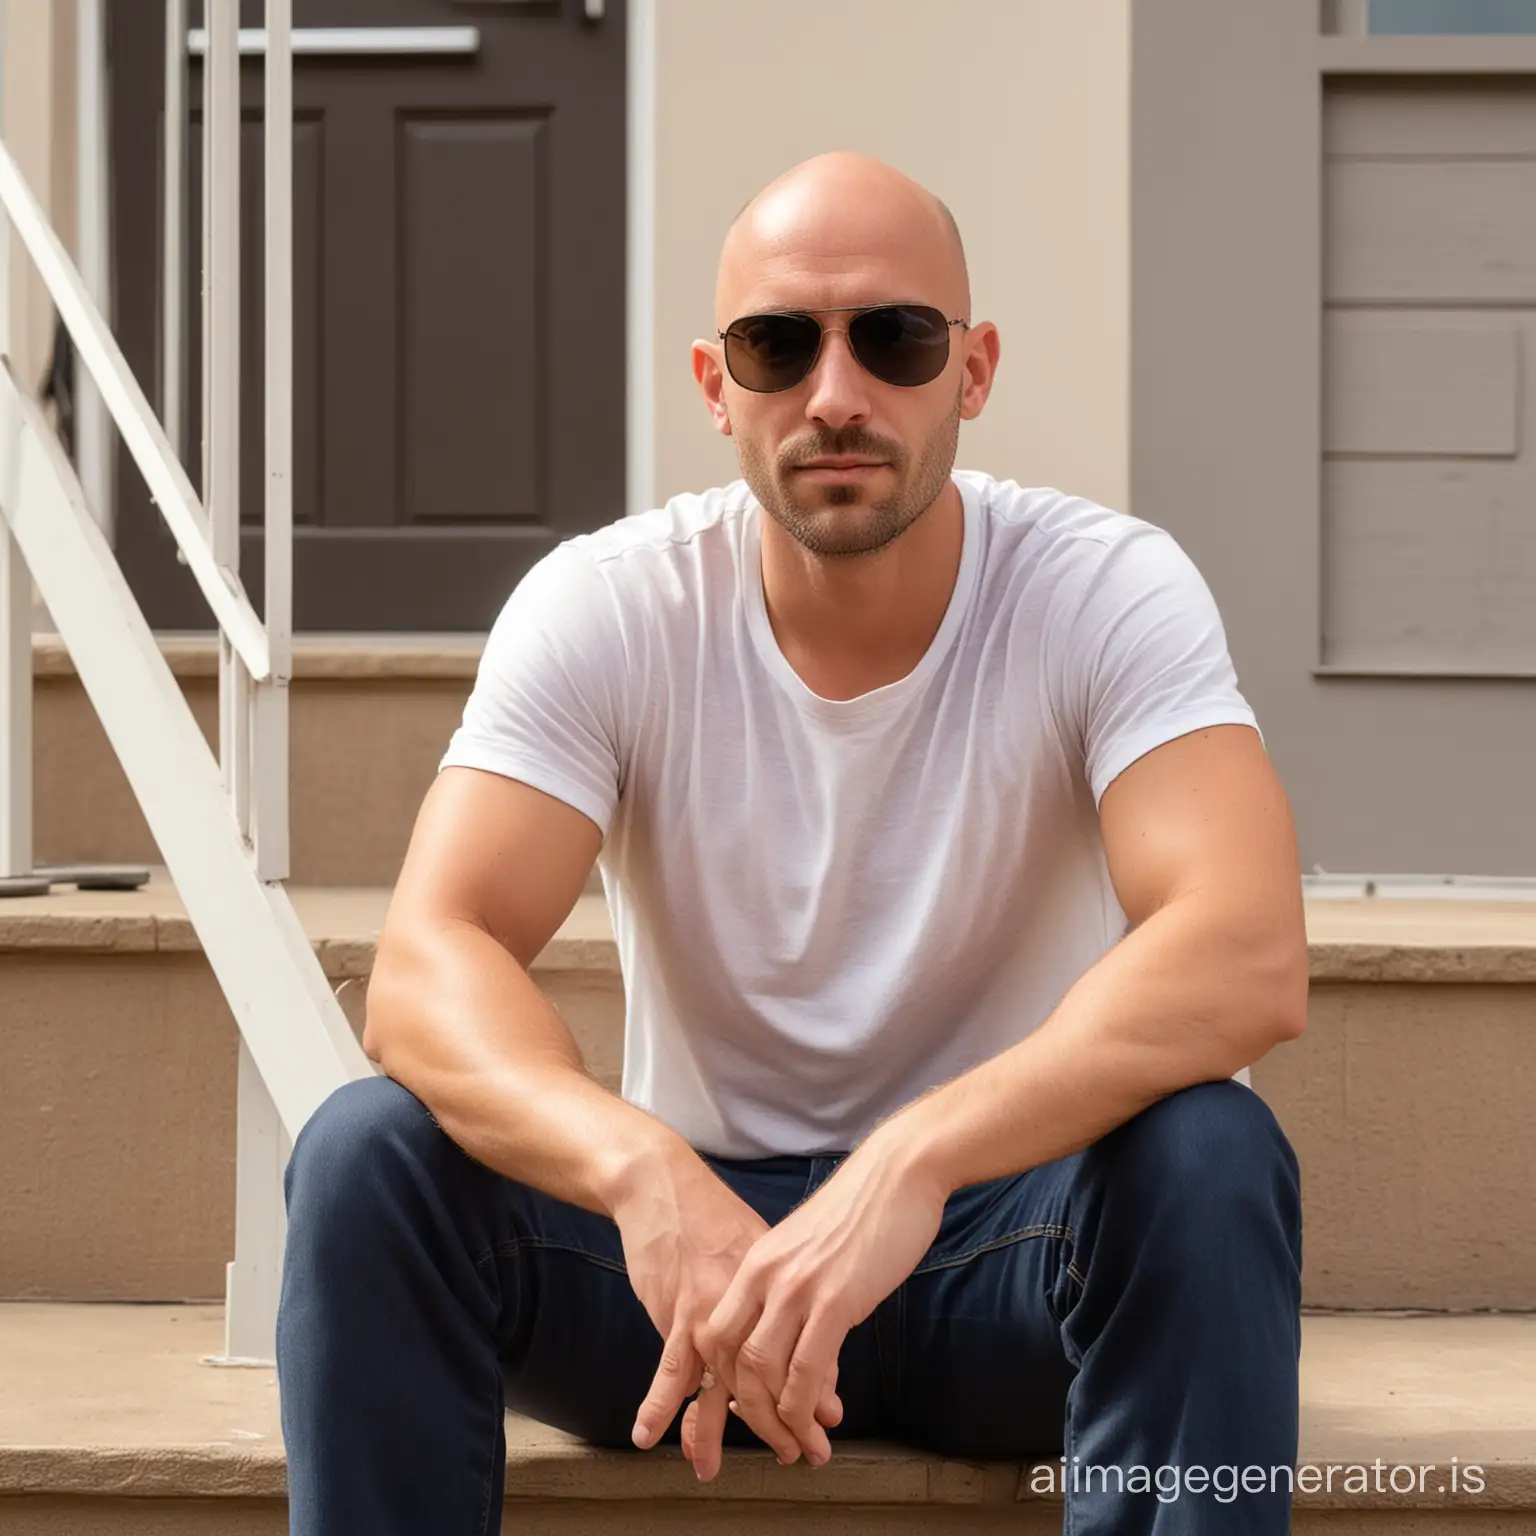 Bald-Man-with-Stubble-and-Sunglasses-Relaxing-on-Outdoor-Steps